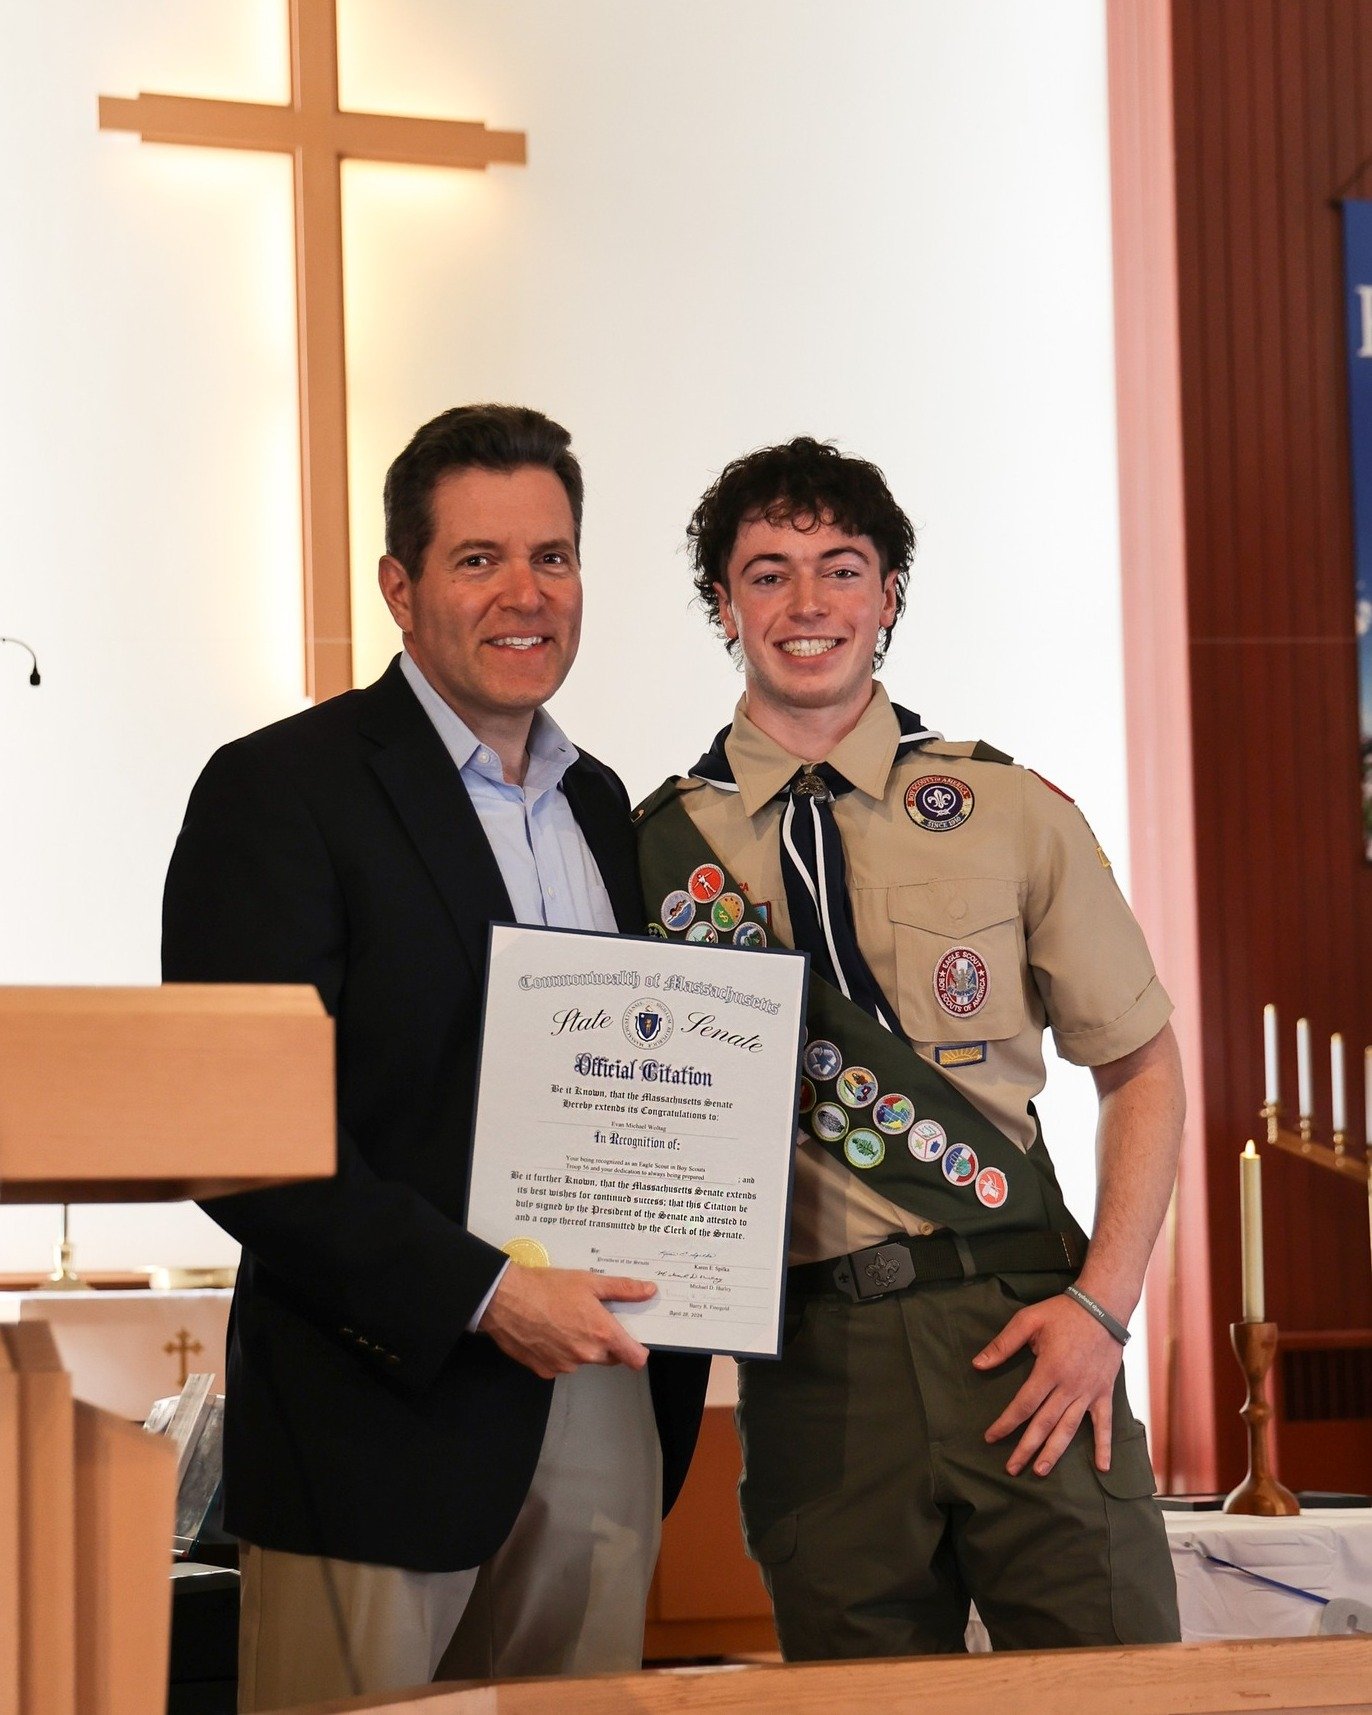 Wilmington gained a new Eagle Scout! I was grateful to celebrate Evan&rsquo;s Court of Honor this weekend. 

Evan dedicated his Eagle Scout project to raising awareness for veterans suffering from the hidden wounds of PTSD. It&rsquo;s inspiring to se